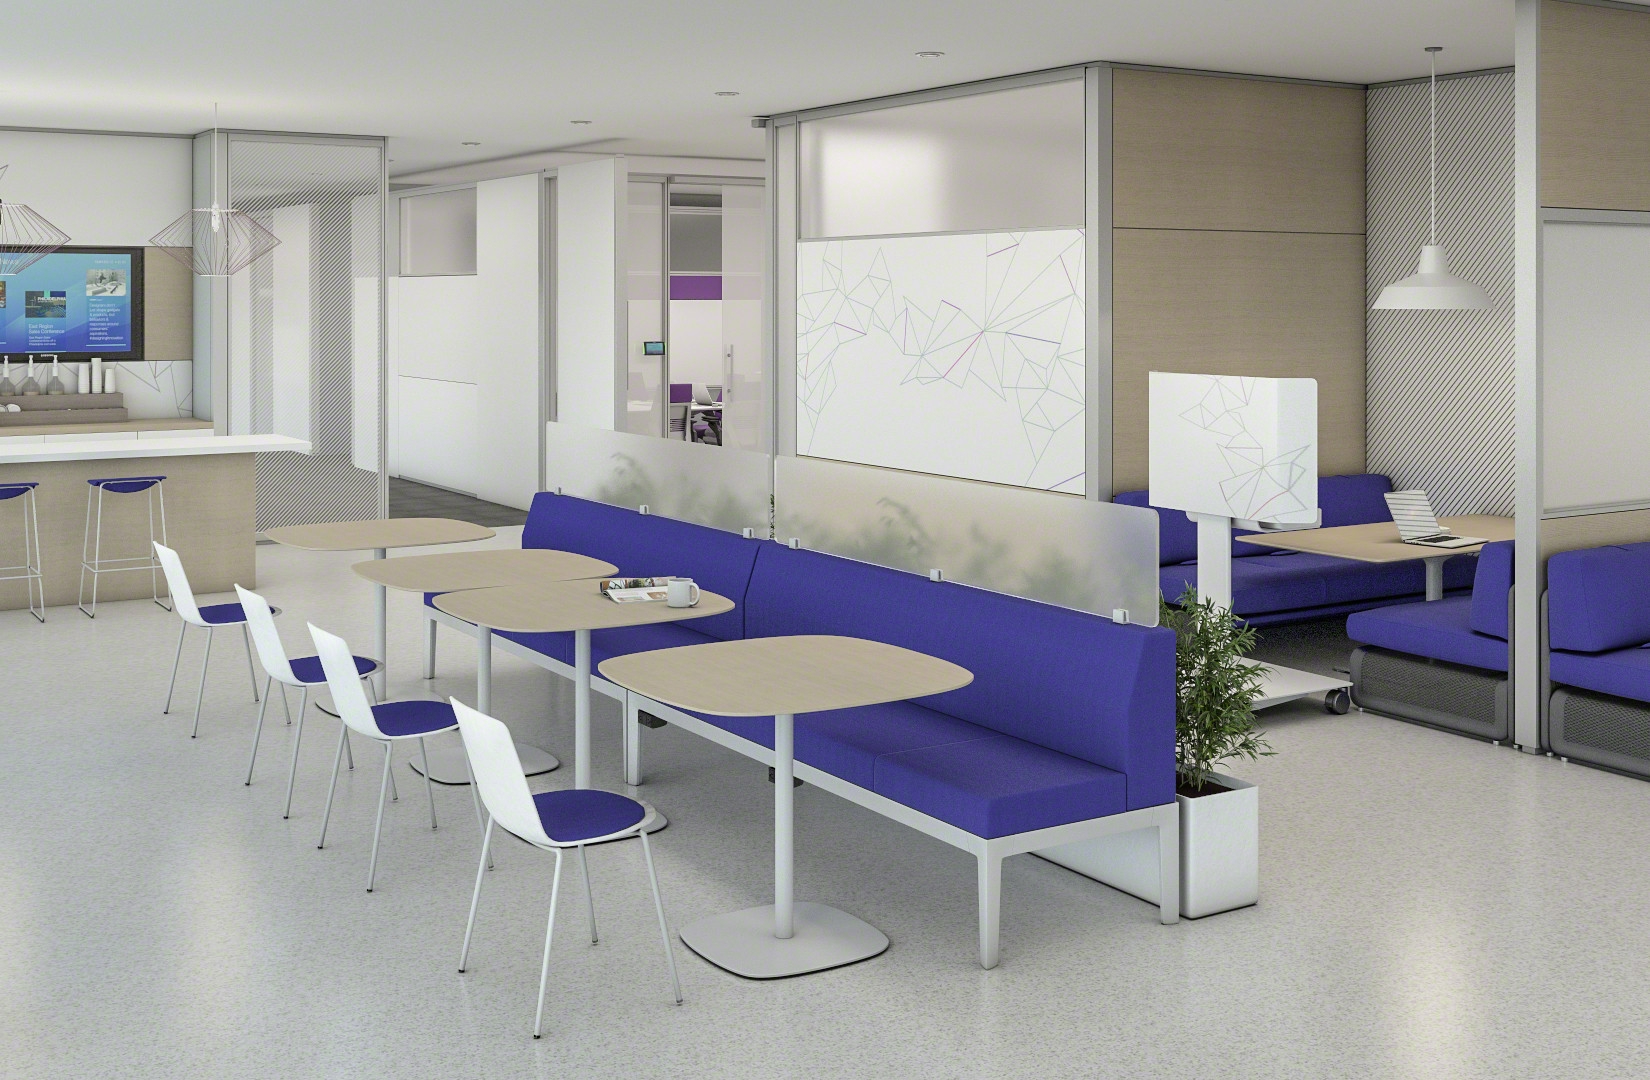 example of a social area in a work place